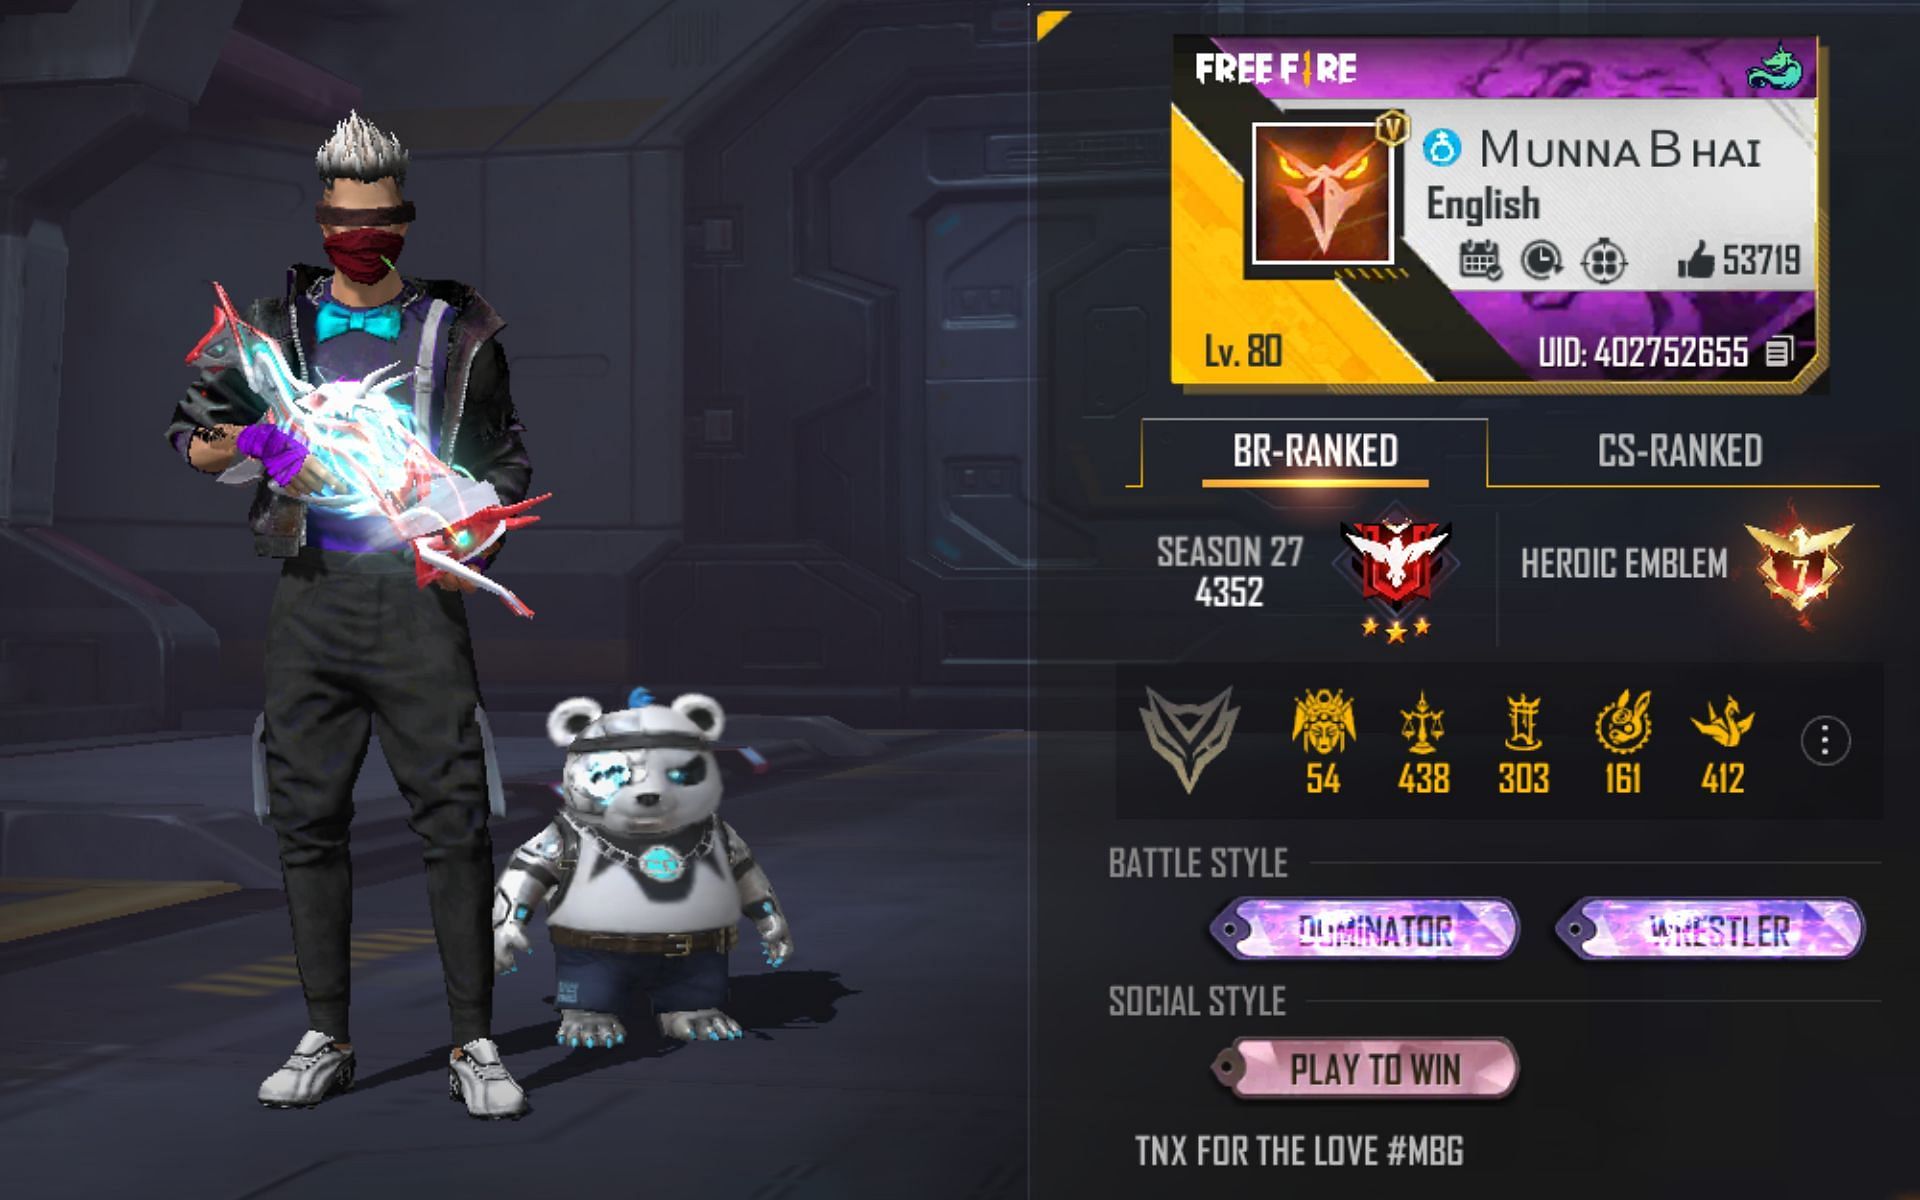 This is the Free Fire MAX ID of Munna bhai gaming (Image via Garena)